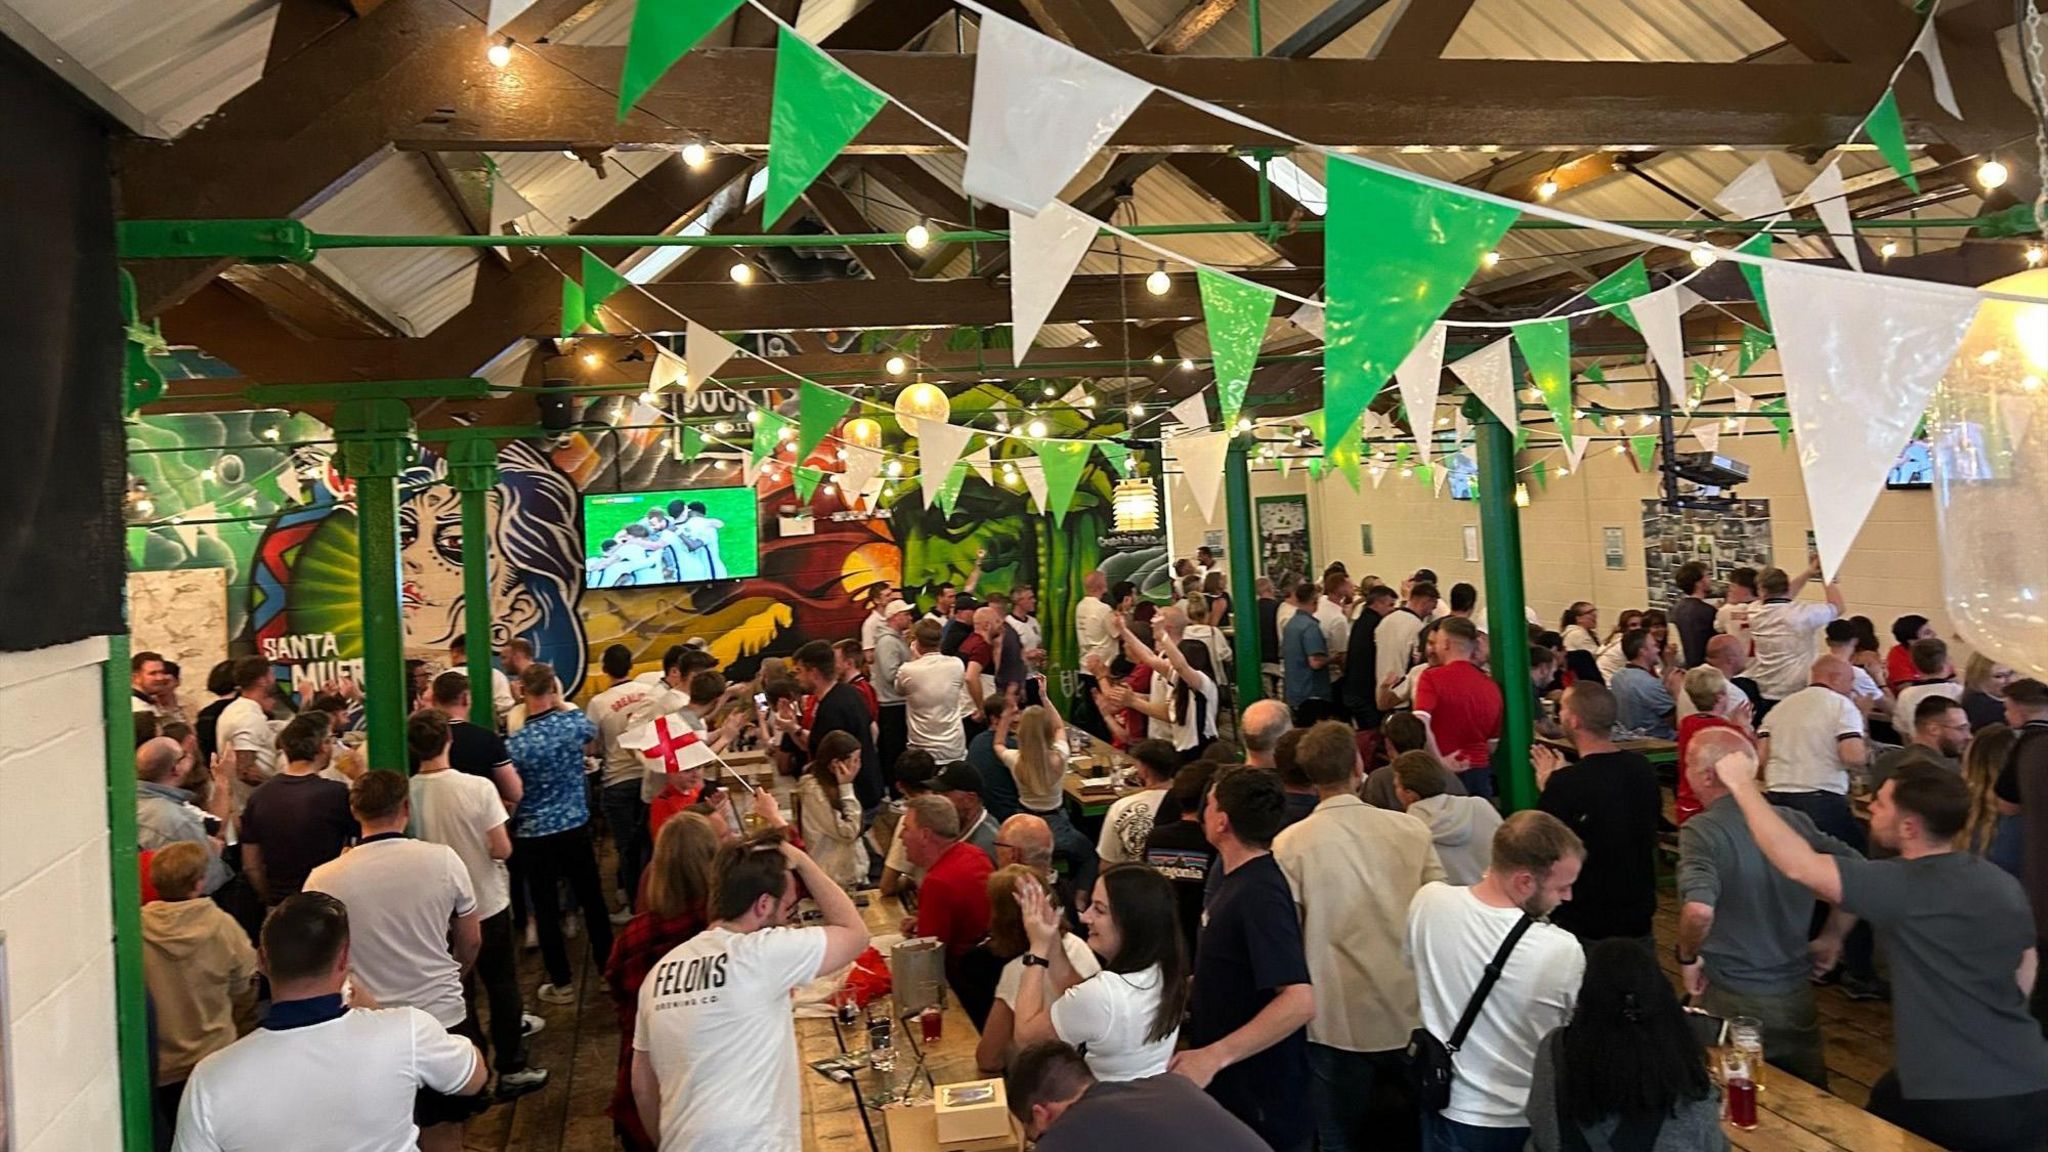 England fans at the brewery for the game